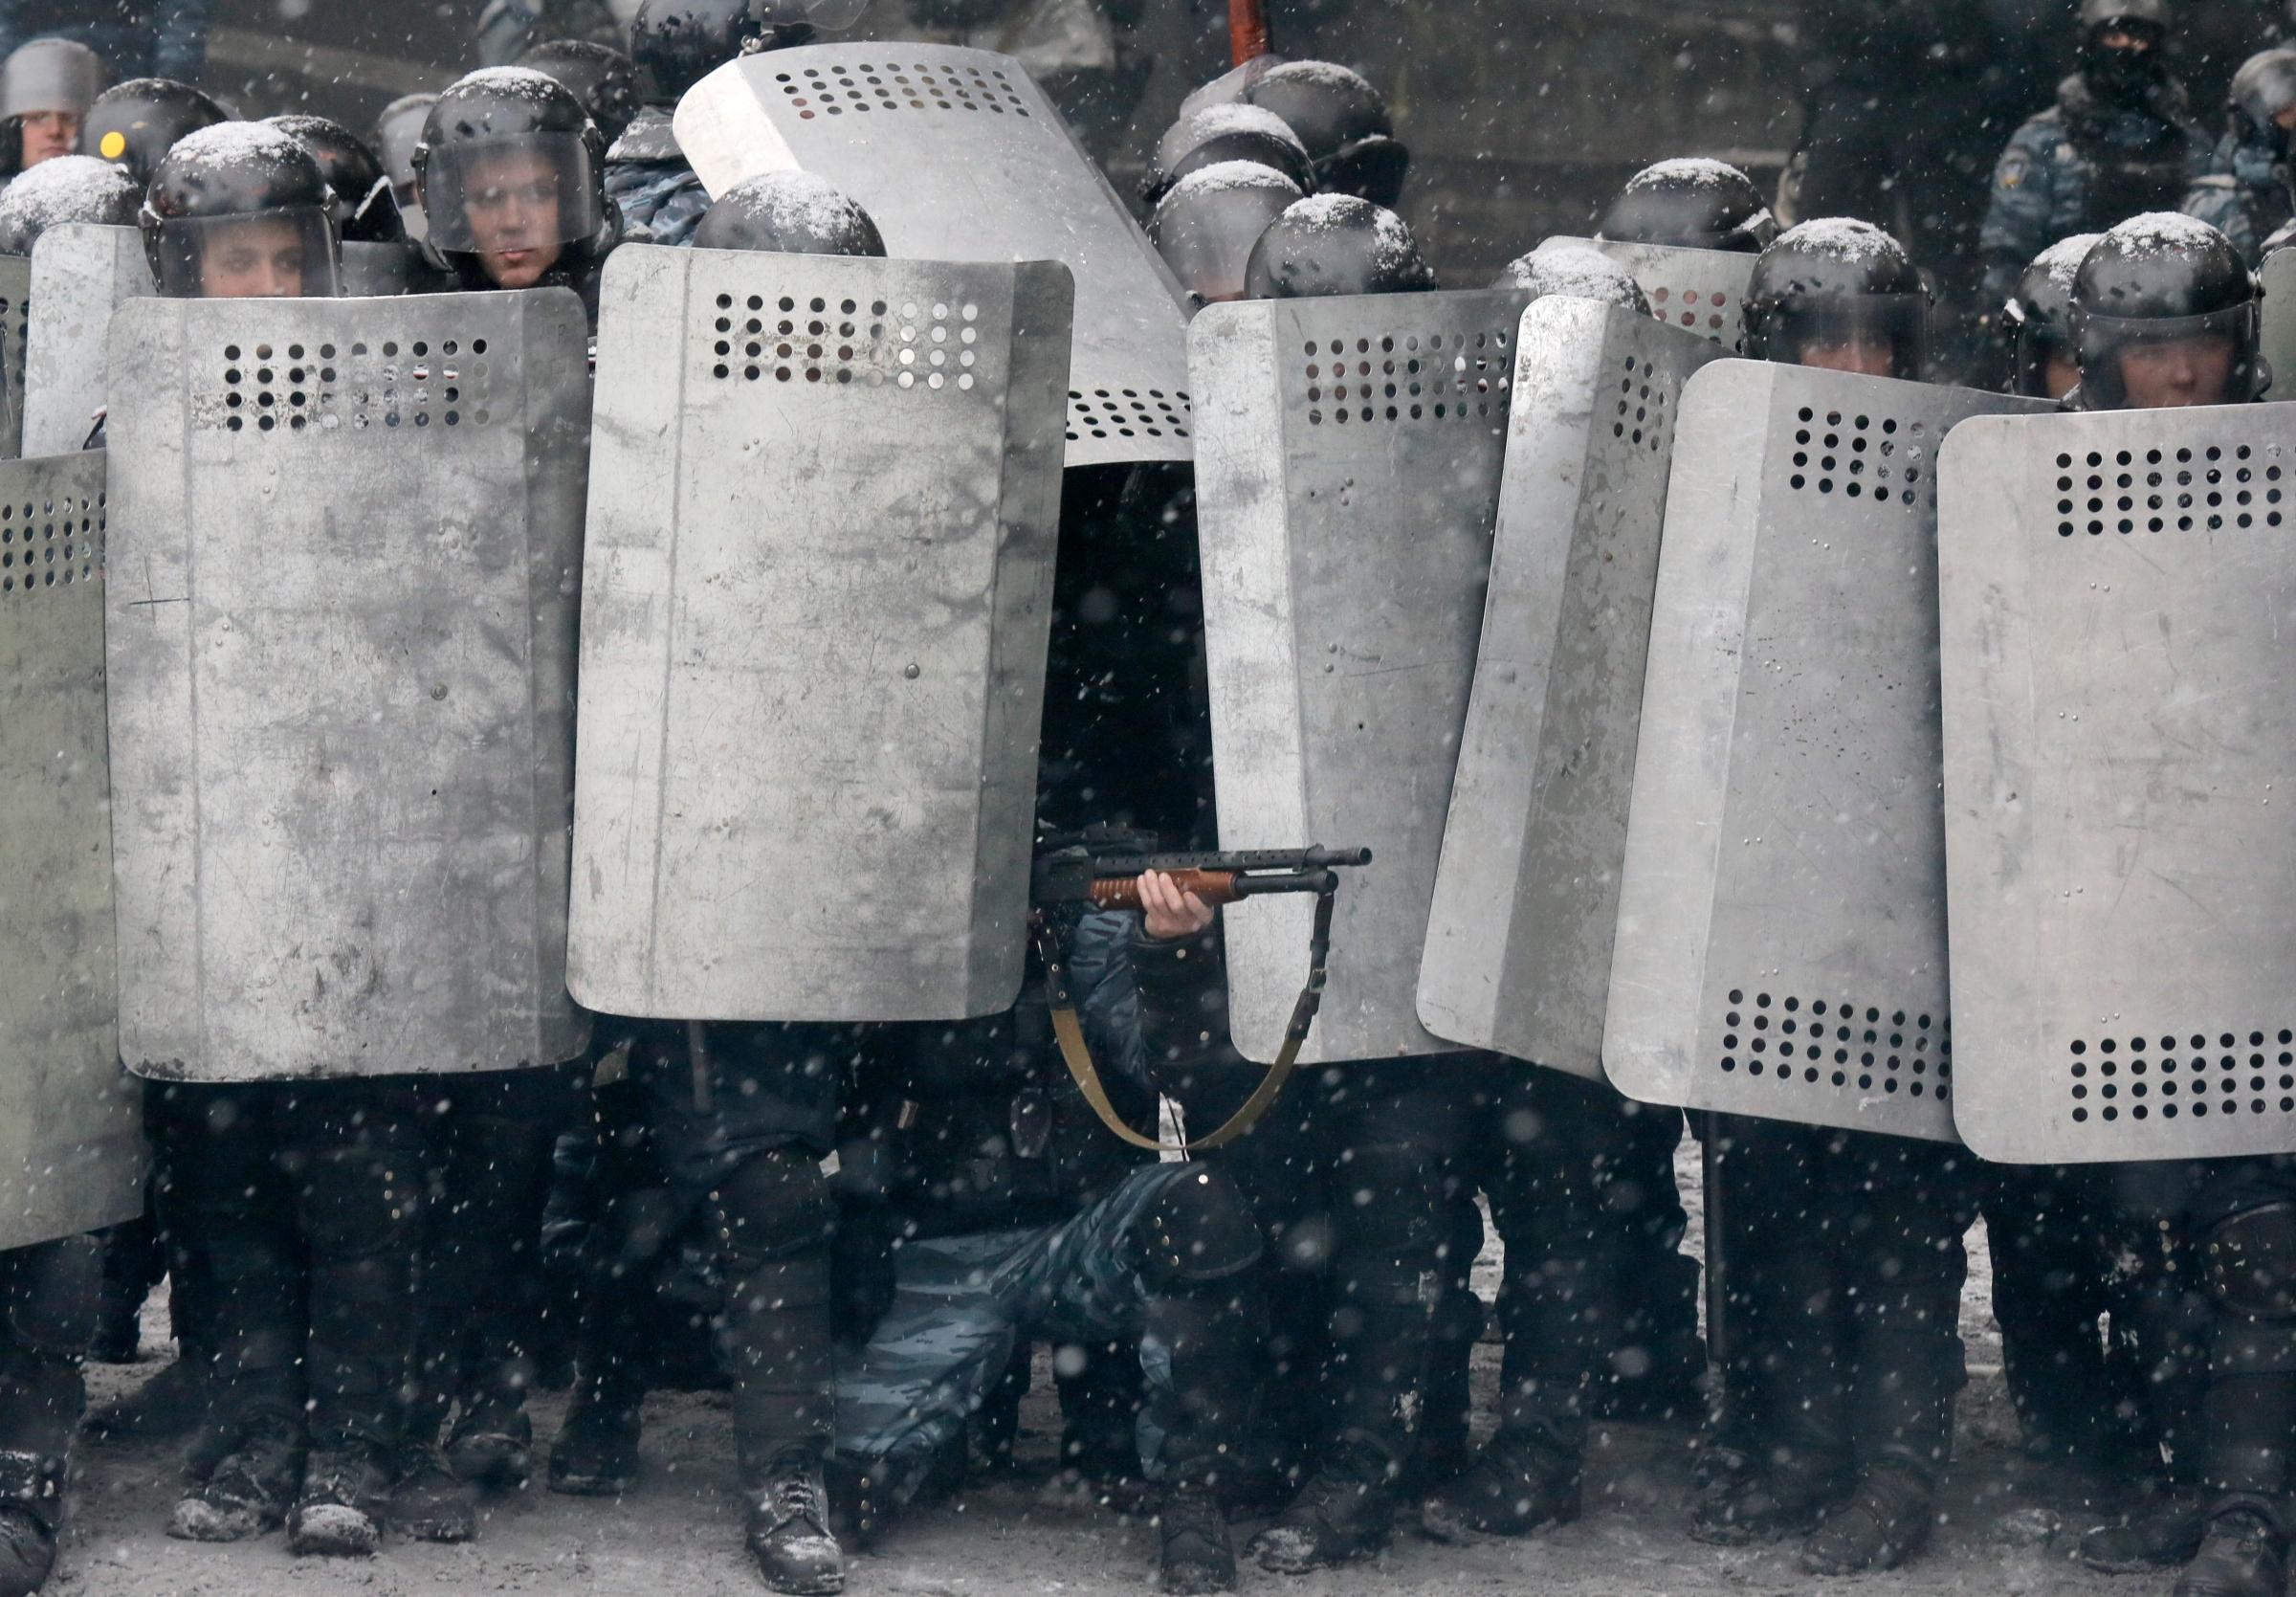 A police officer aims his shotgun during clashes with protesters in central Kiev, Jan. 22, 2014.